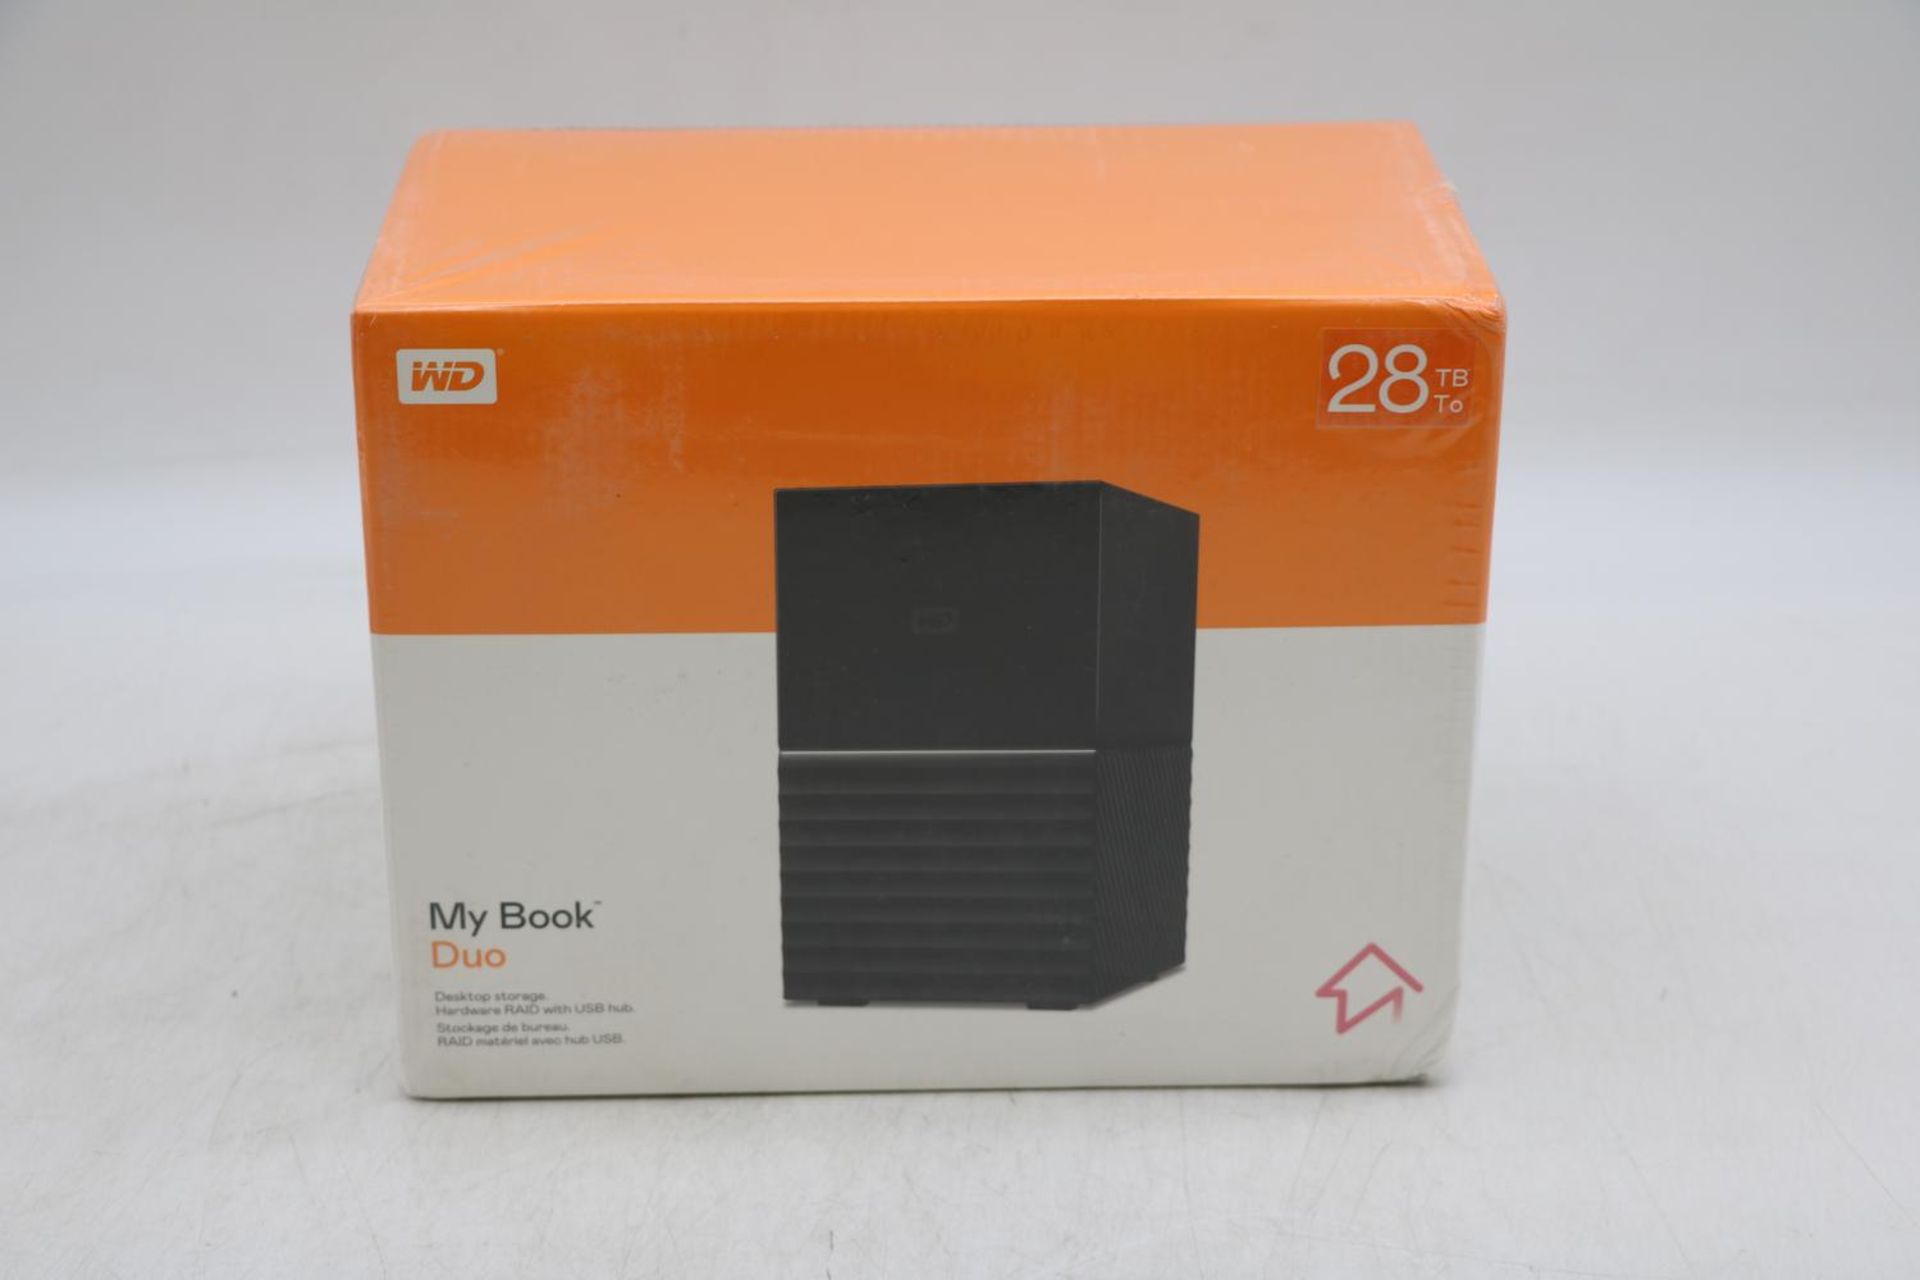 WD My Book Duo 28TB 2-Bay External Hard Drive, Black - Image 2 of 2